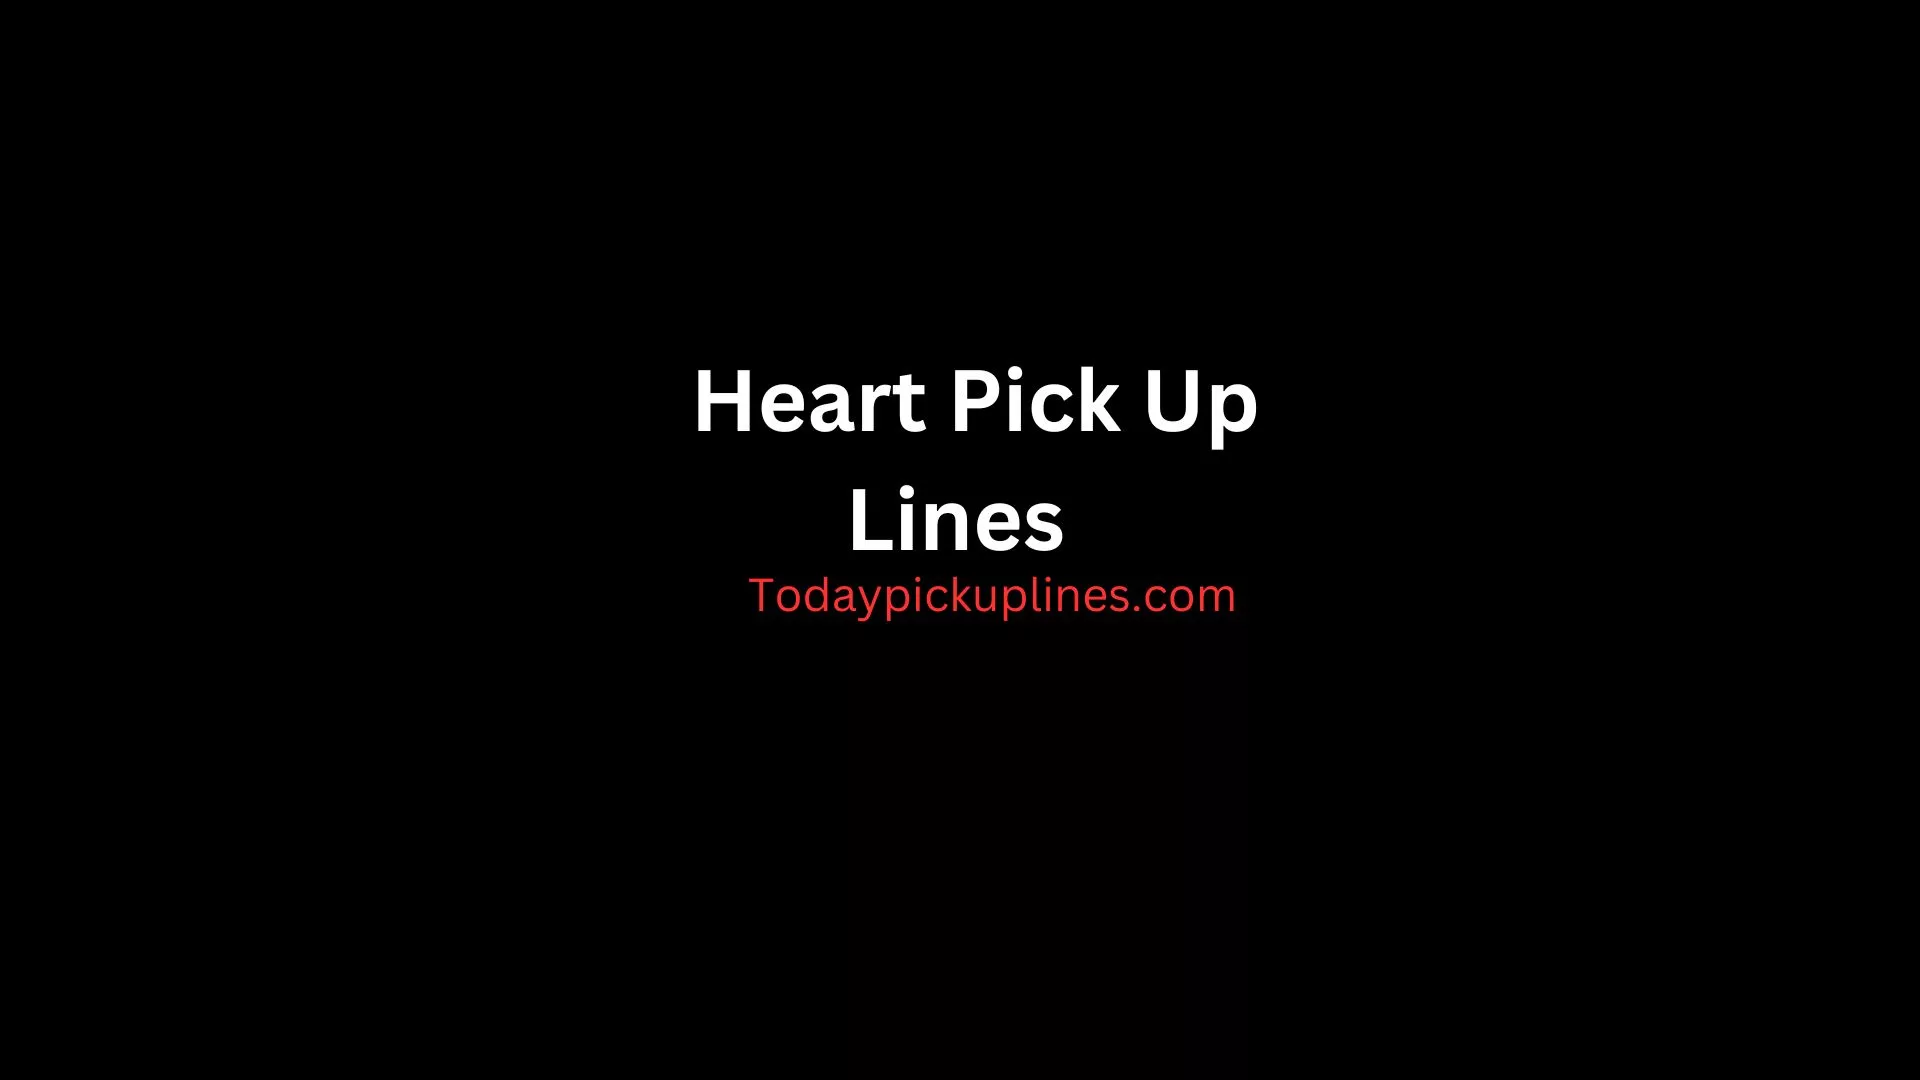 Heart Pick Up Lines